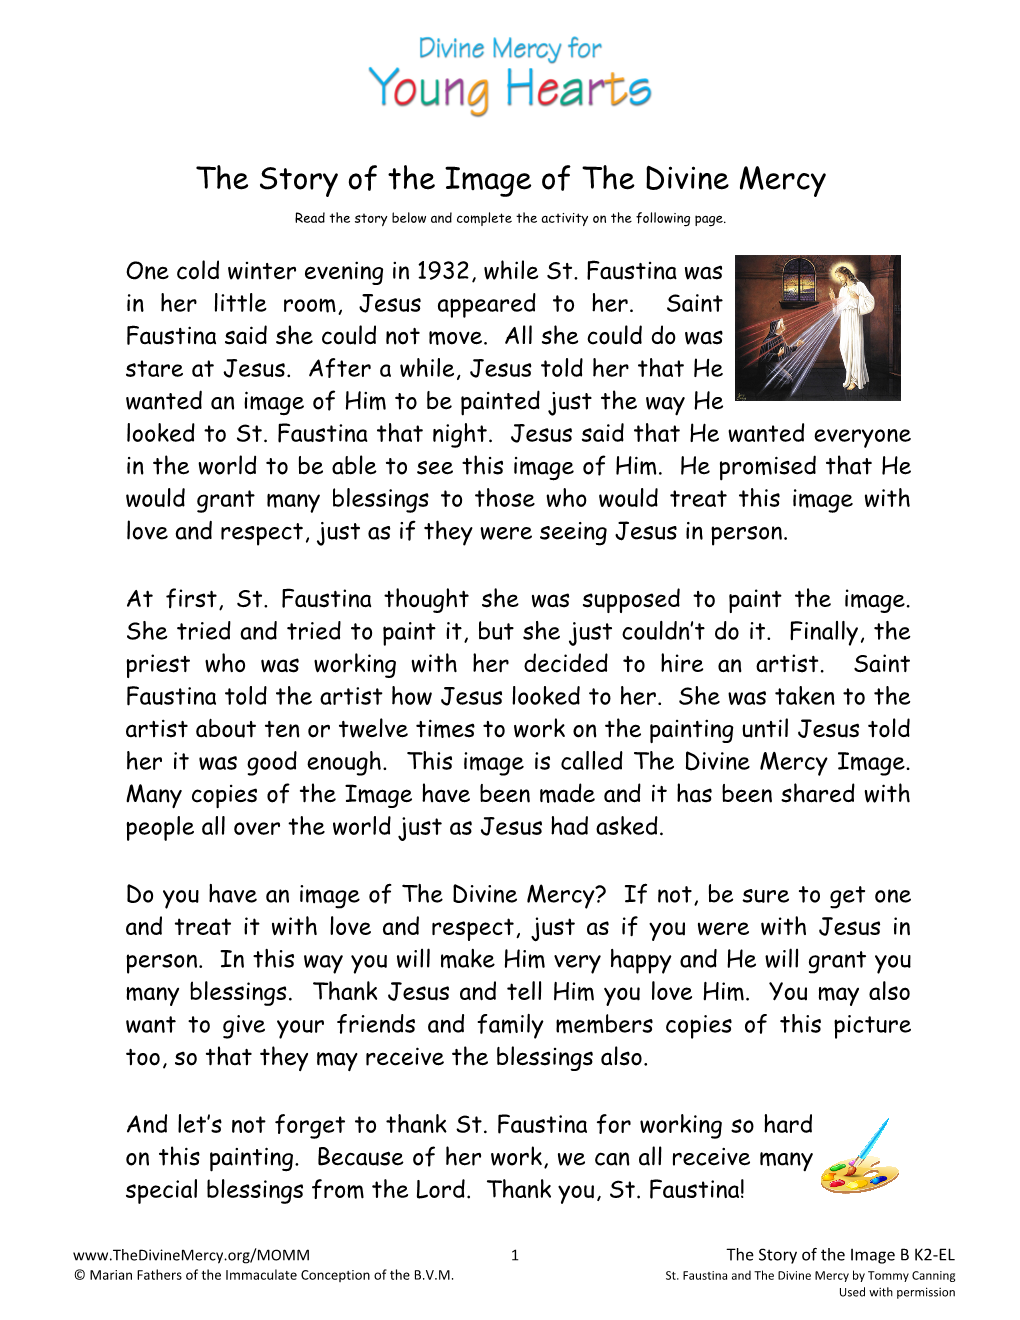 The Story of the Image of the Divine Mercy